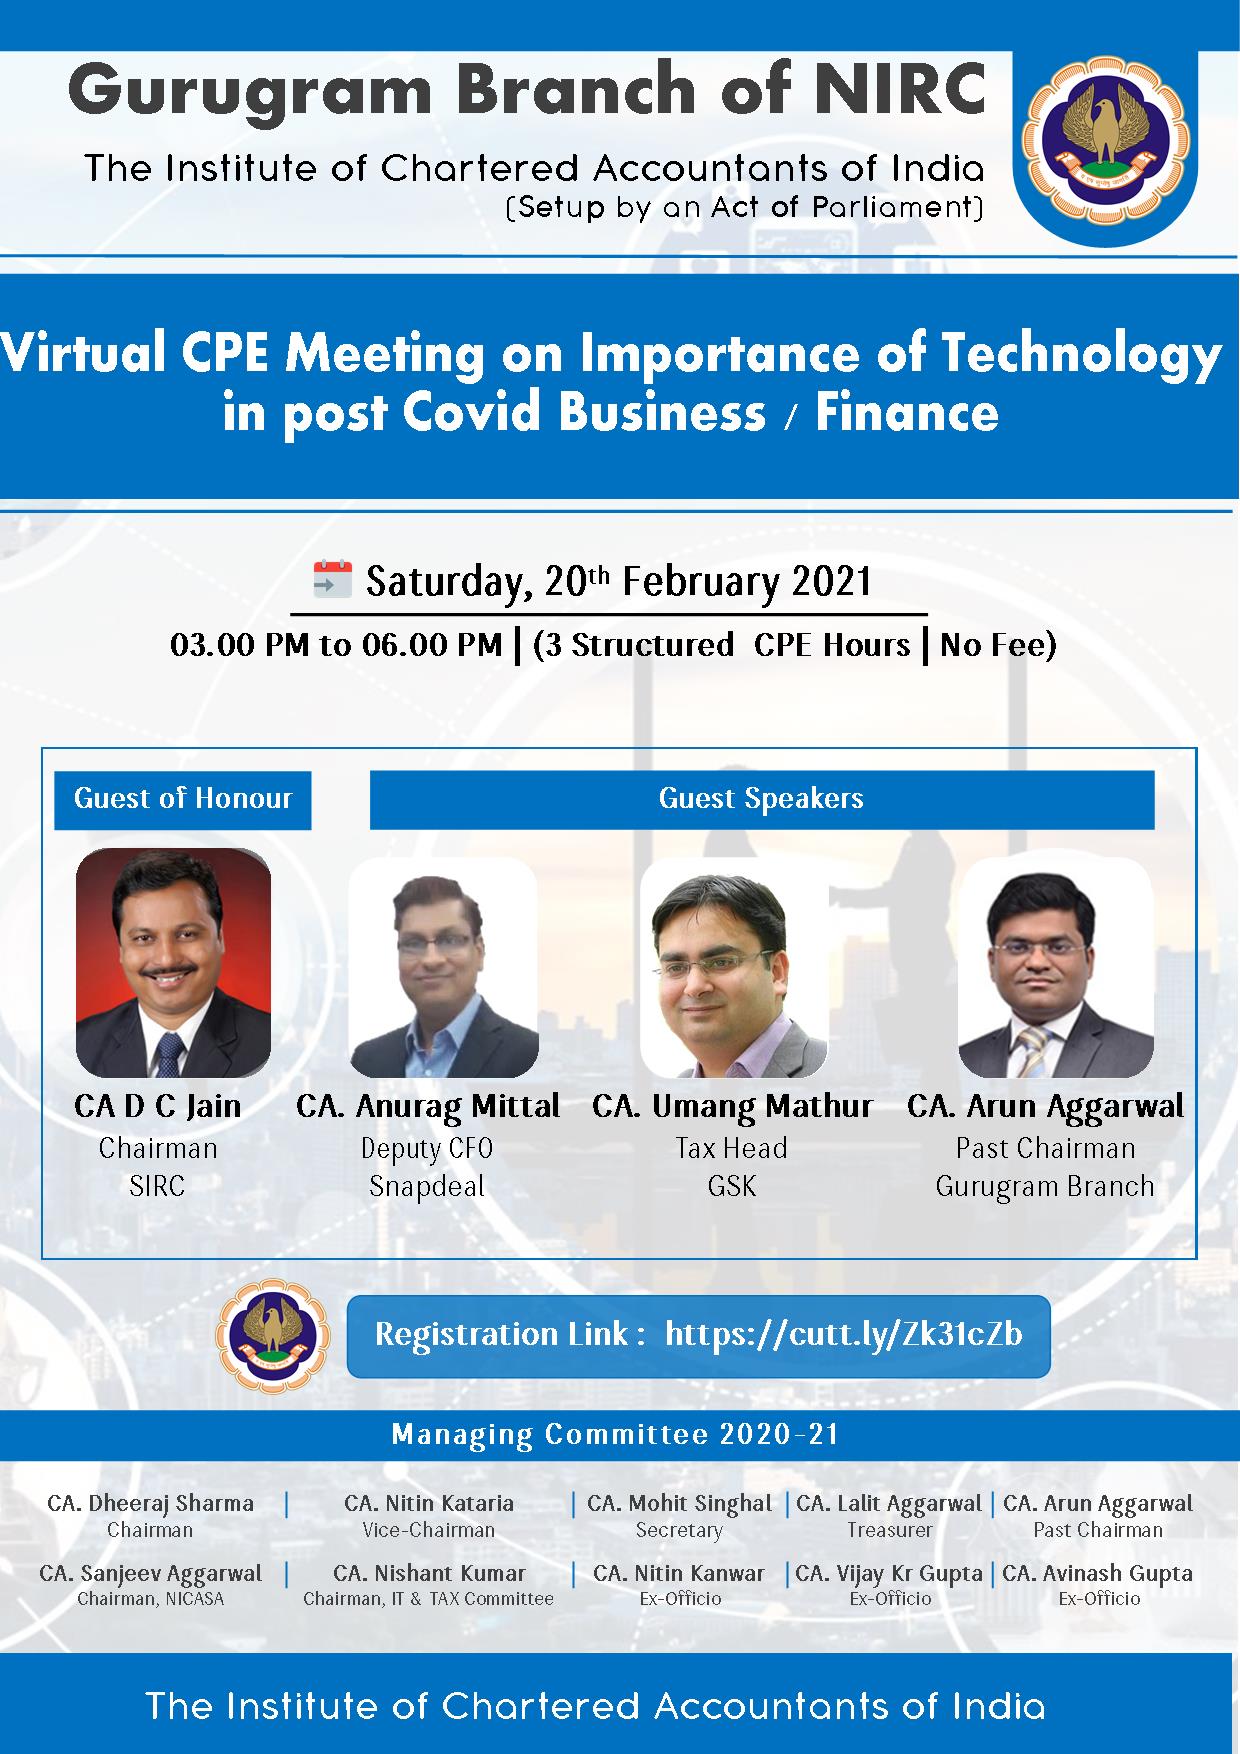 Virtual CPE Meeting on Importance of Technology in post Covid Business / Finance